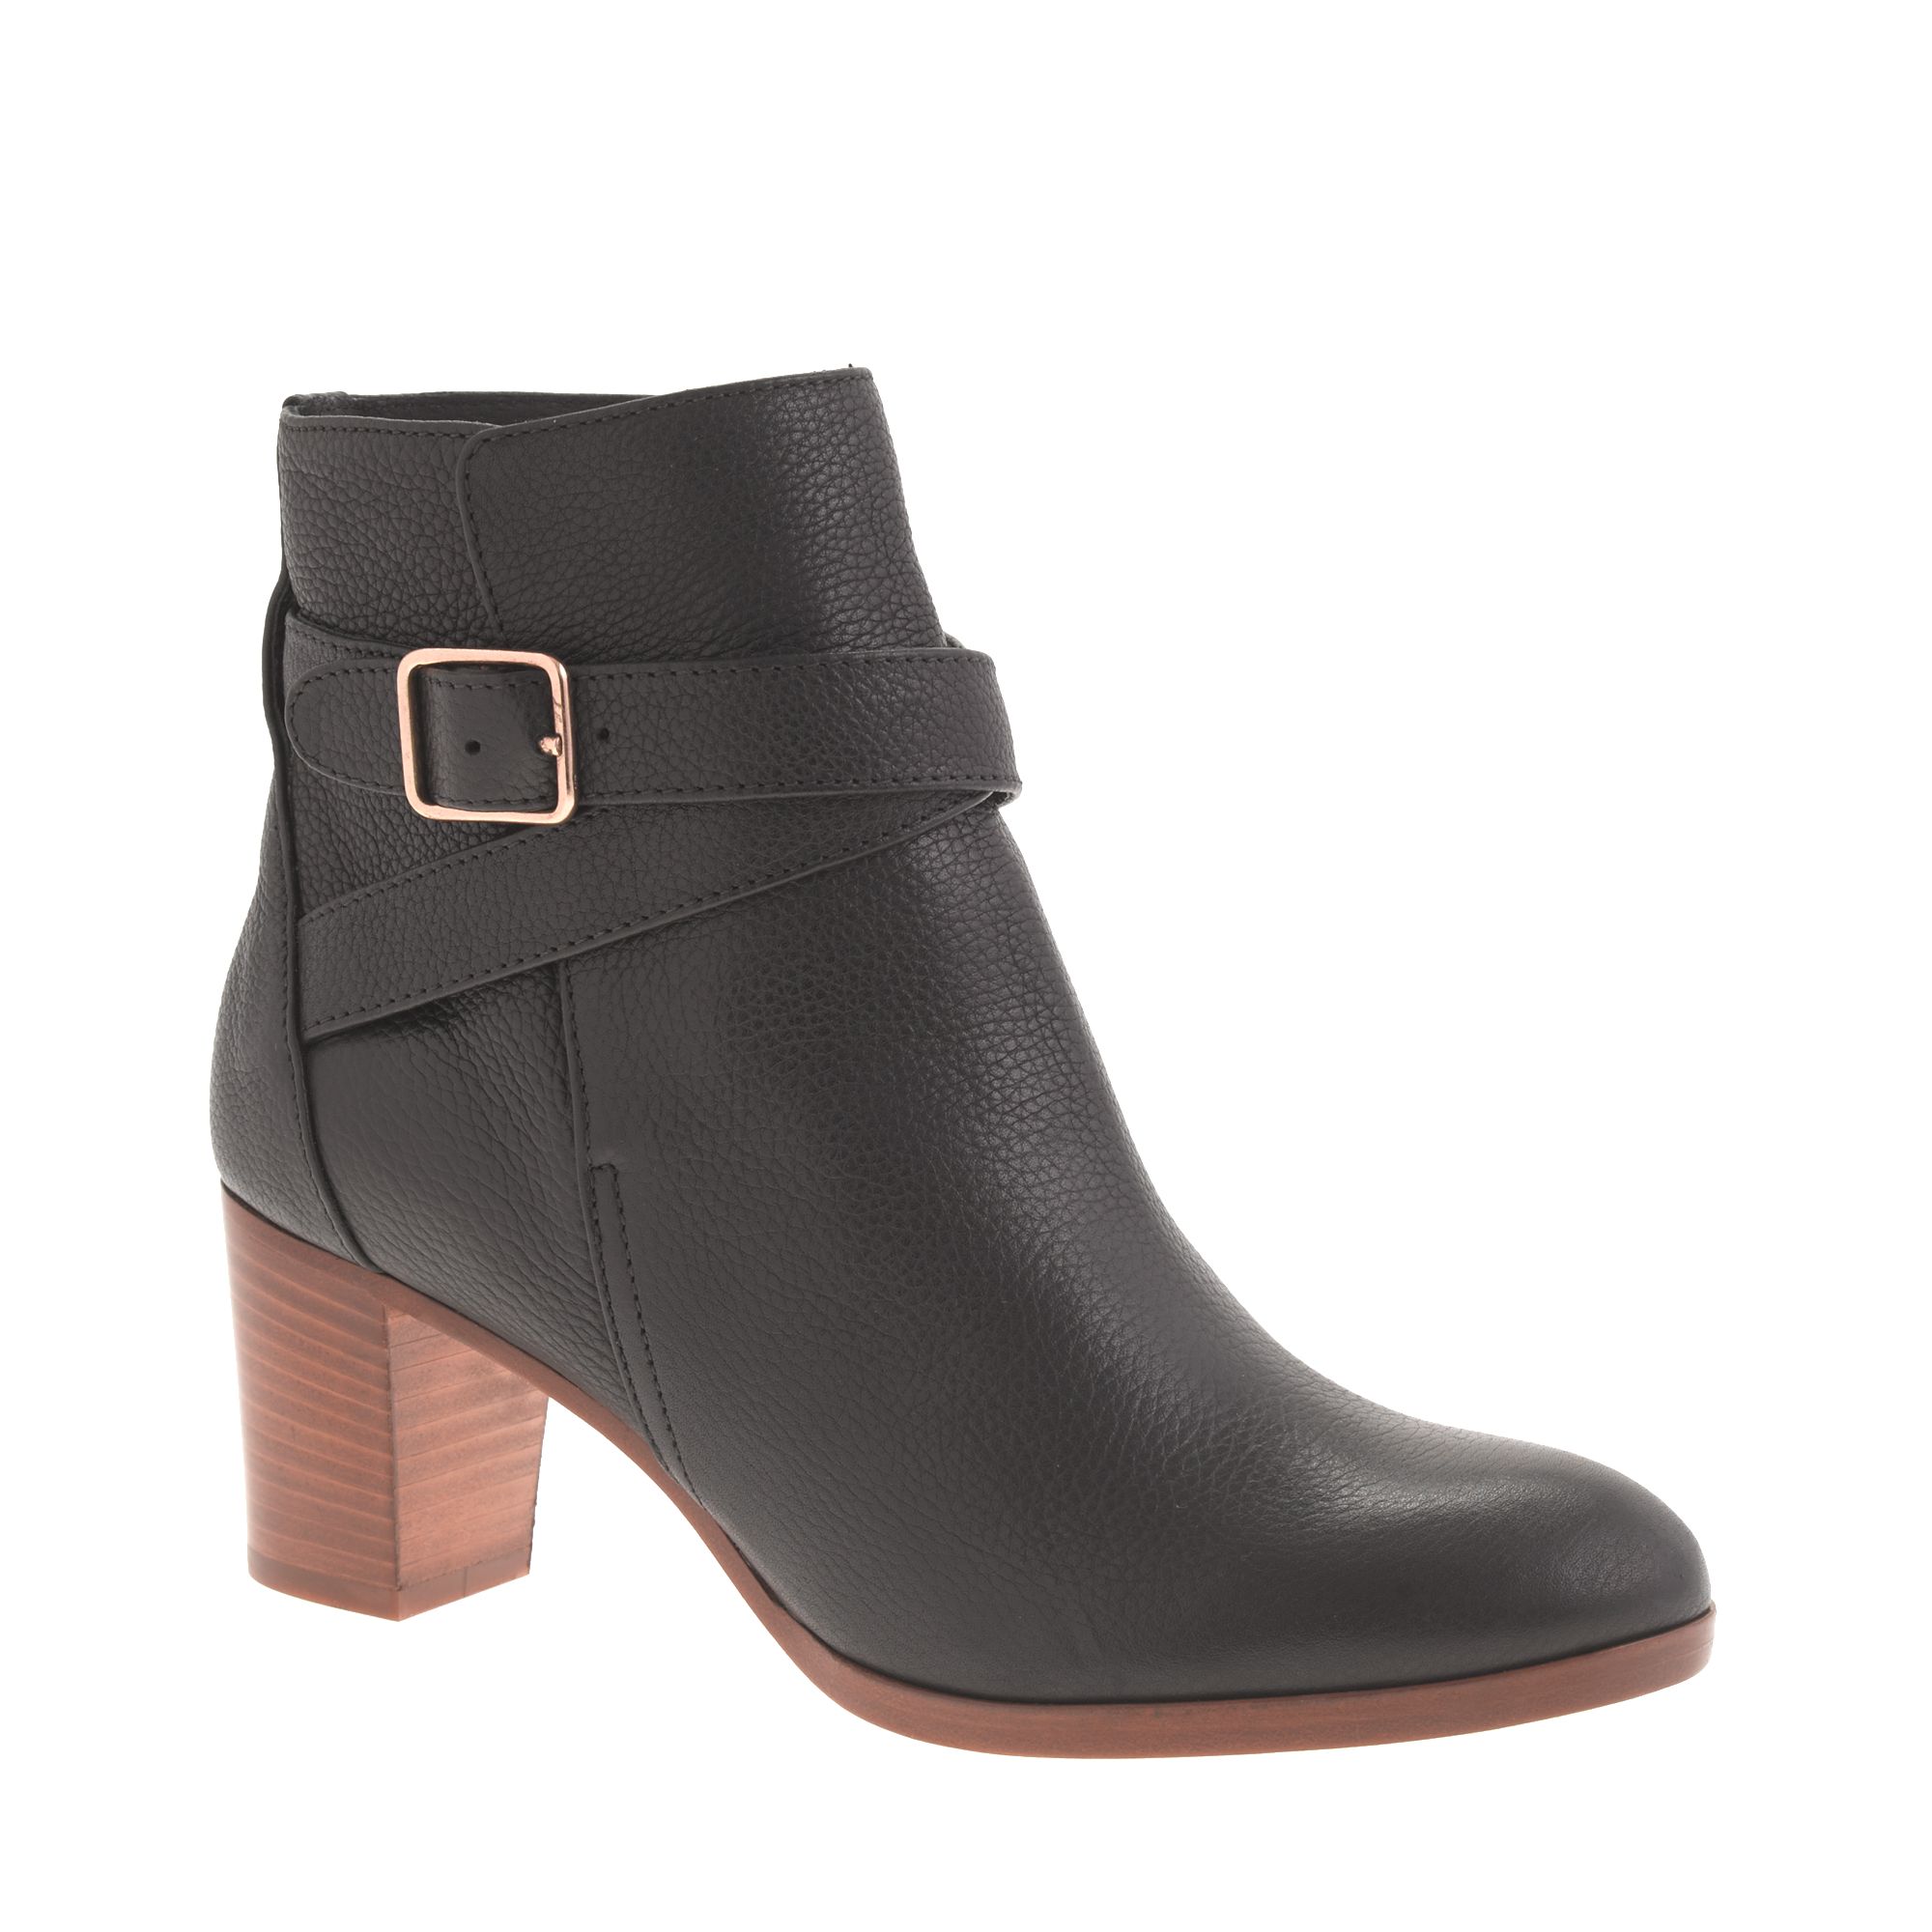 J.crew Aiden Ankle Boots in Black | Lyst